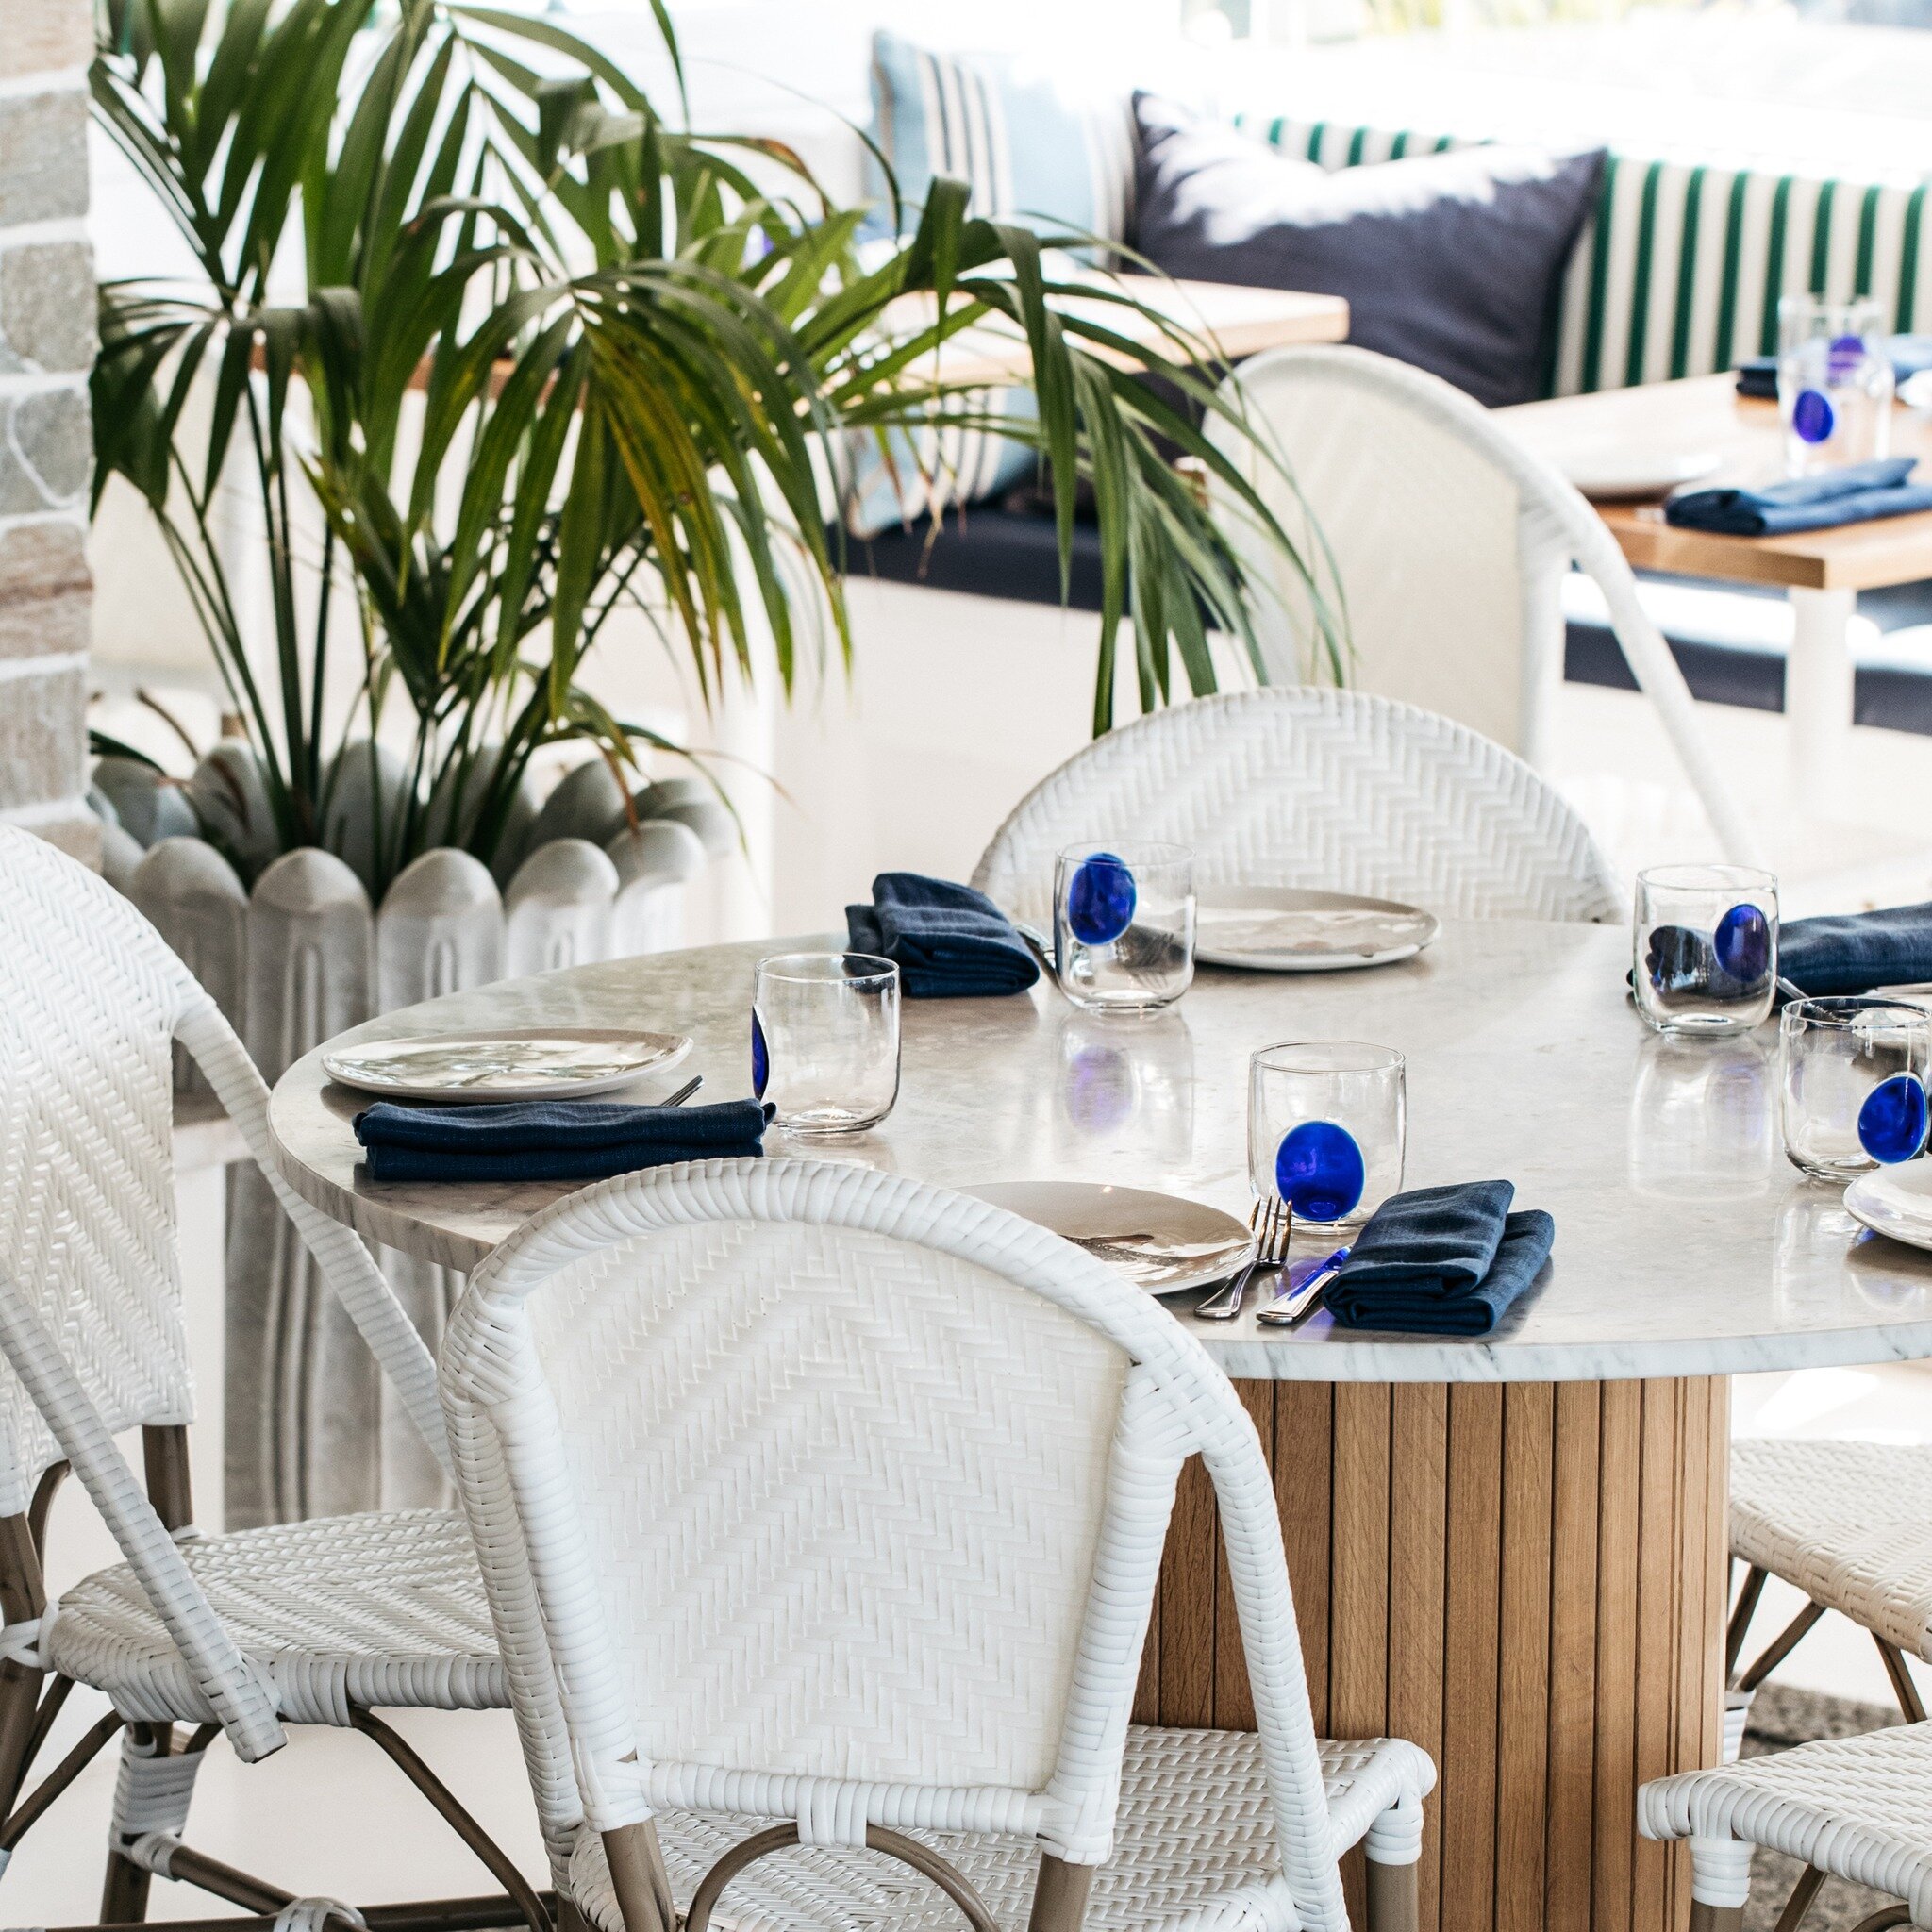 Where fine cuisine meets waterfront views &ndash; Welcome to Rose Bay House!  See you over the weekend.